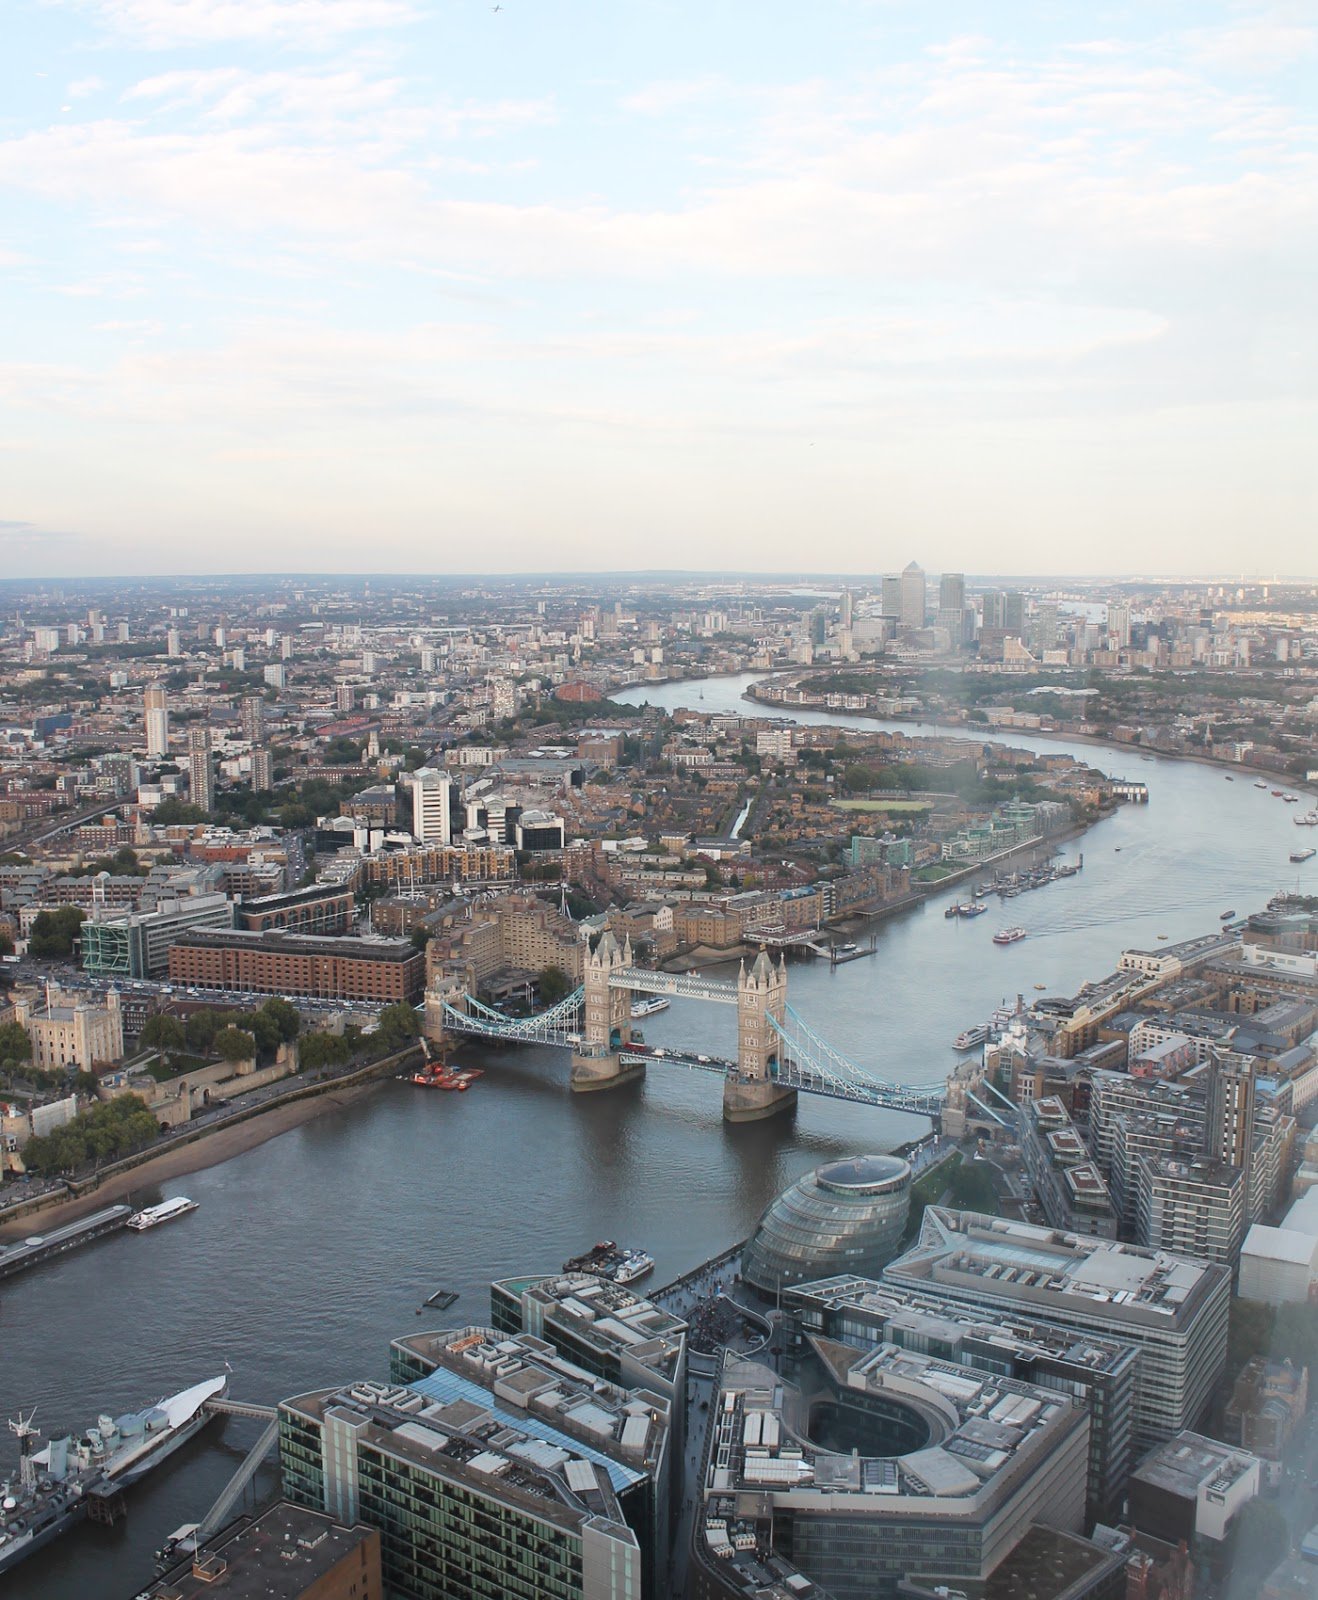 Sweet Monday, Do More With Avios, The view from The Shard